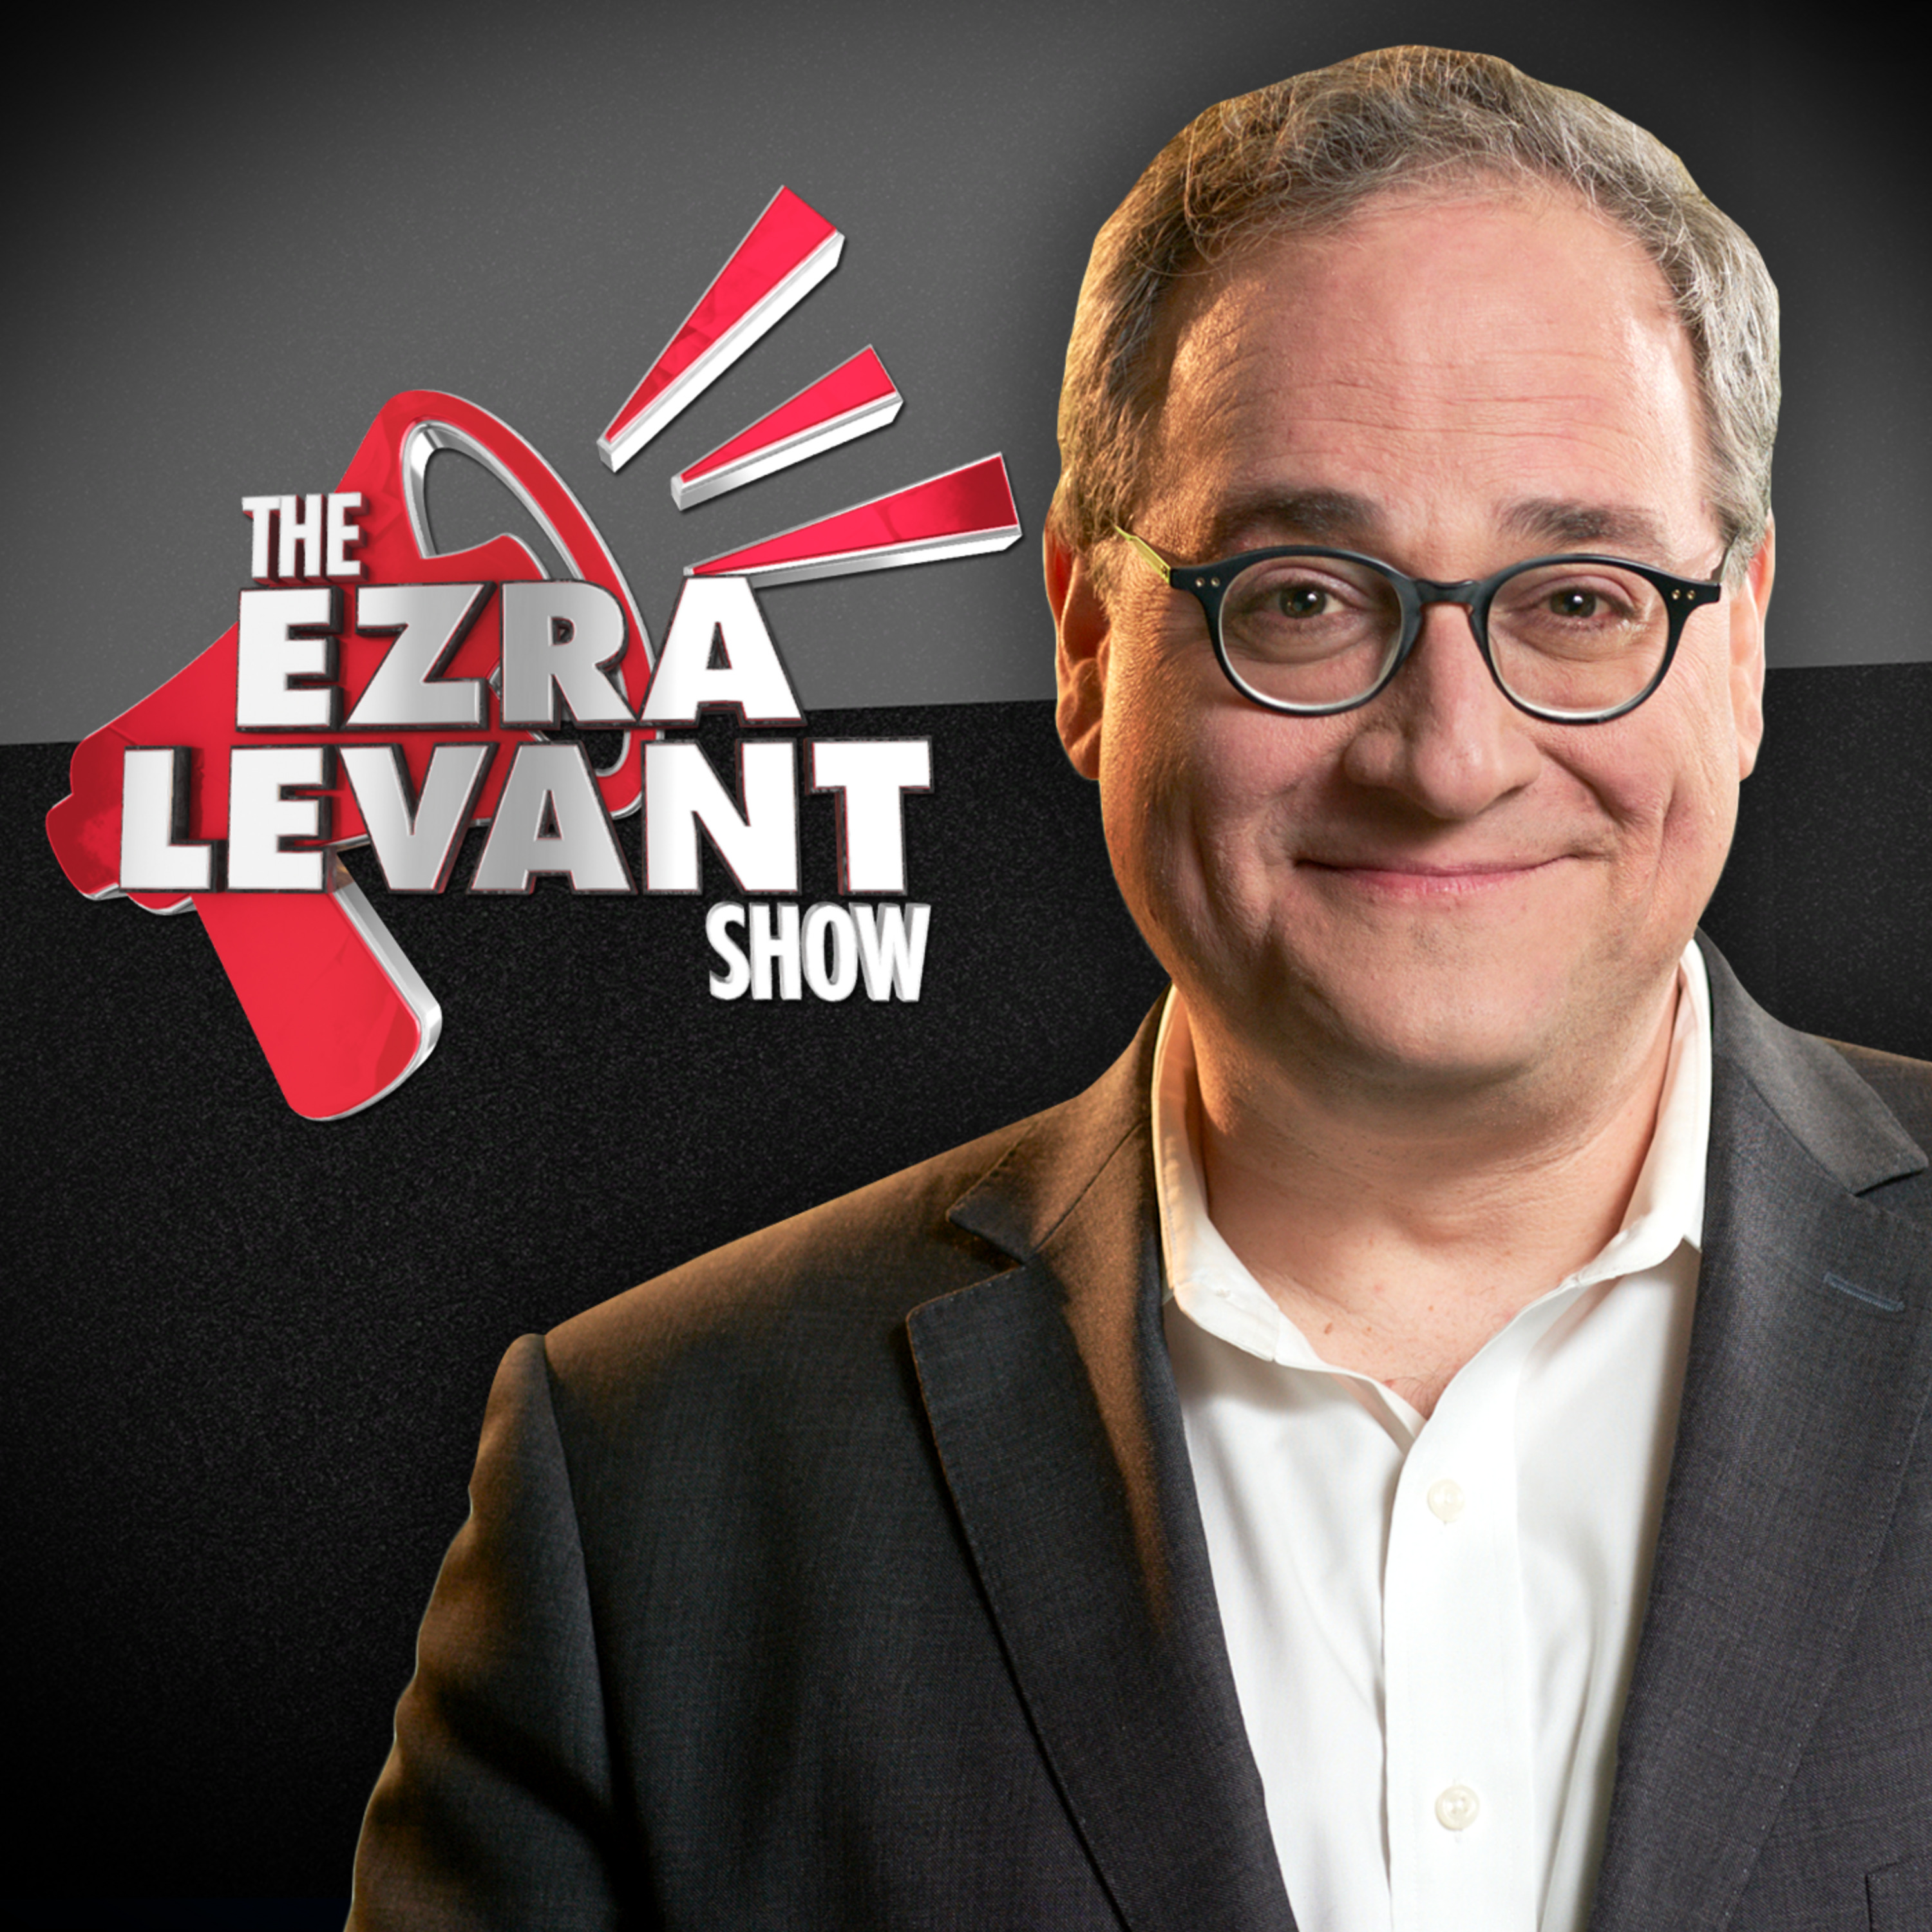 EZRA LEVANT | The World Economic Forum wants you to give up your car